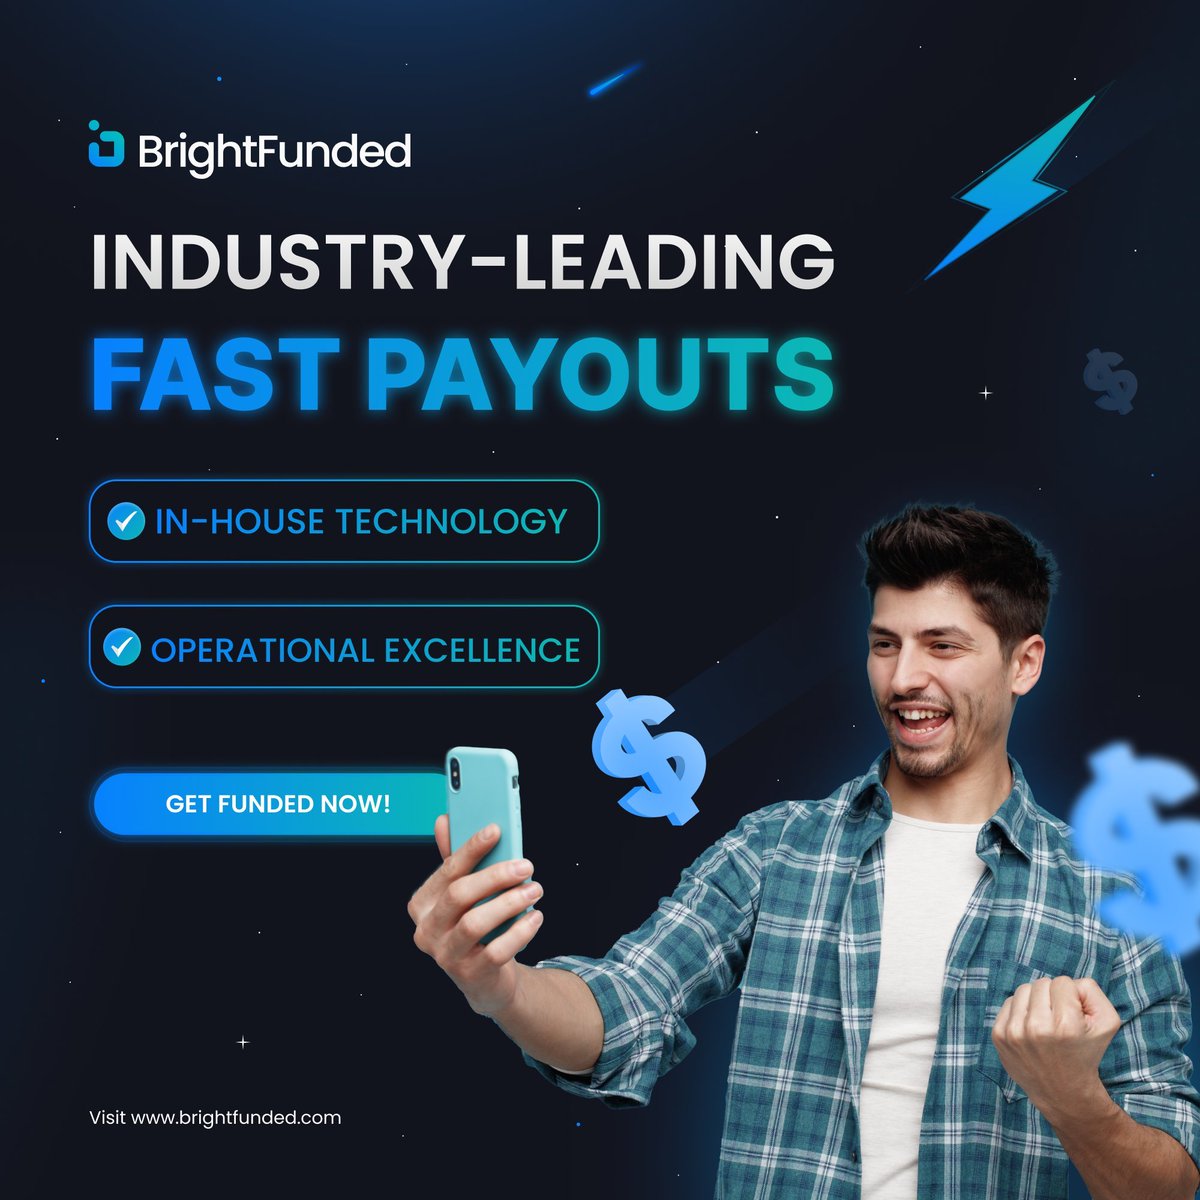 Experience the Industry-Leading Fast Payouts with BrightFunded! ⚡️ Our cutting-edge technology and operational excellence deliver the ultimate prop trading experience. 💎 Join us and elevate your trading game! 🚀